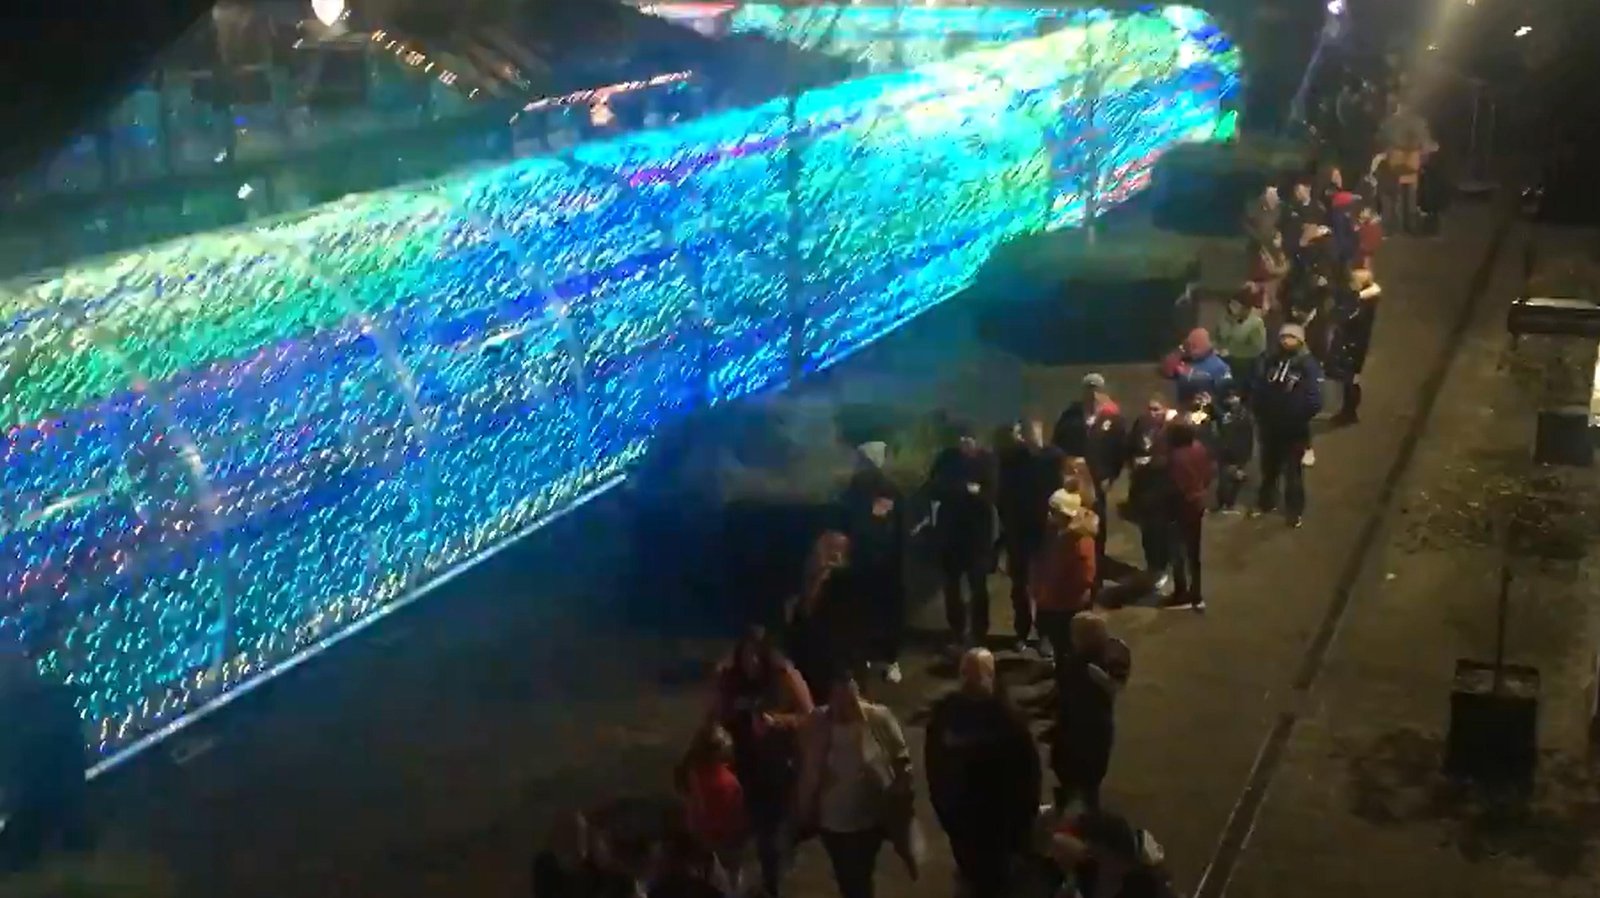 The NI Christmas light show suspended a large crowd

